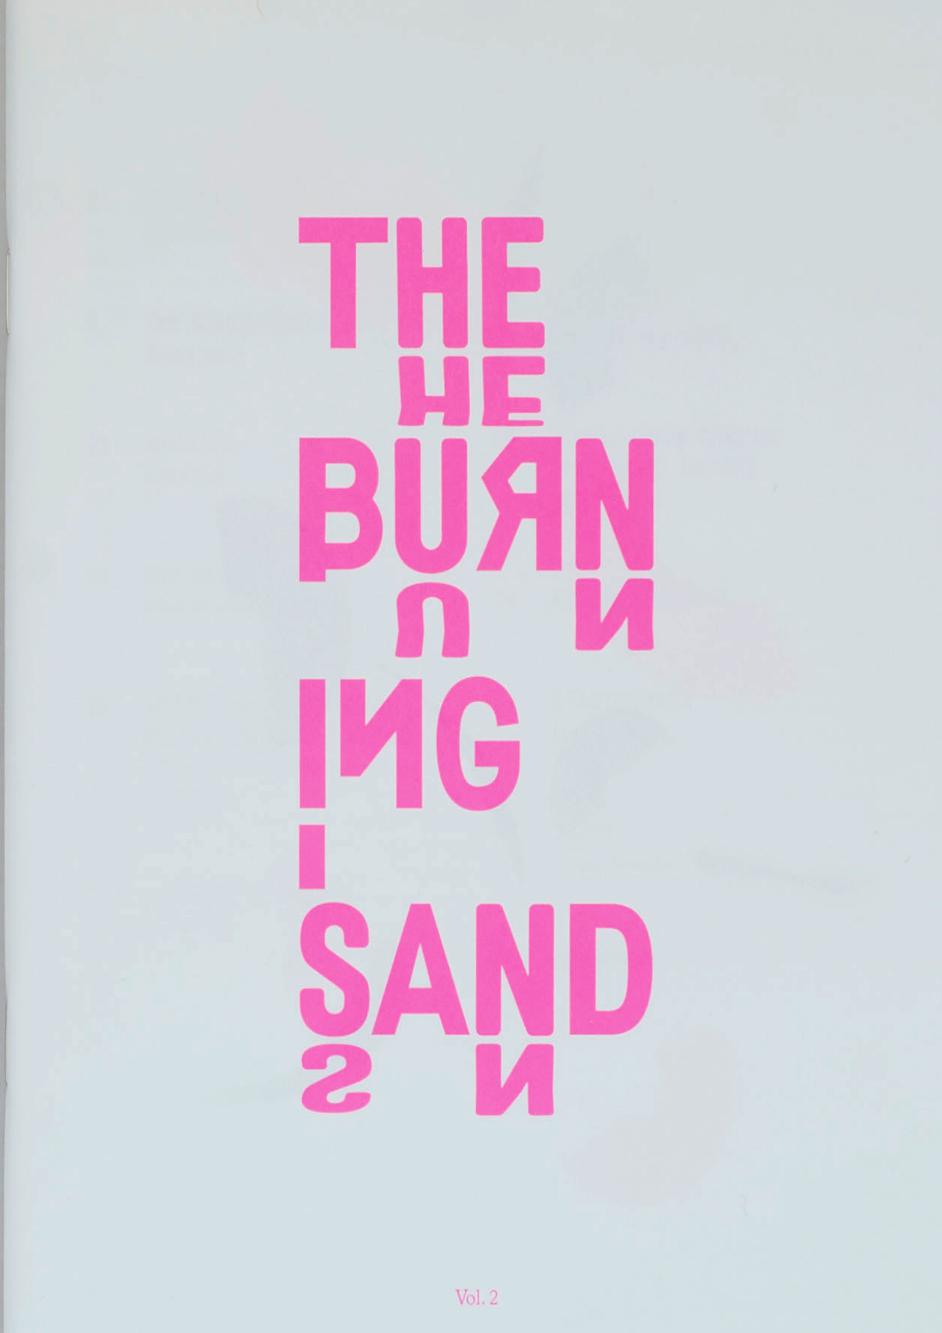 THE BURNING SAND, A New Glasgow-Based Journal of Art and Literature